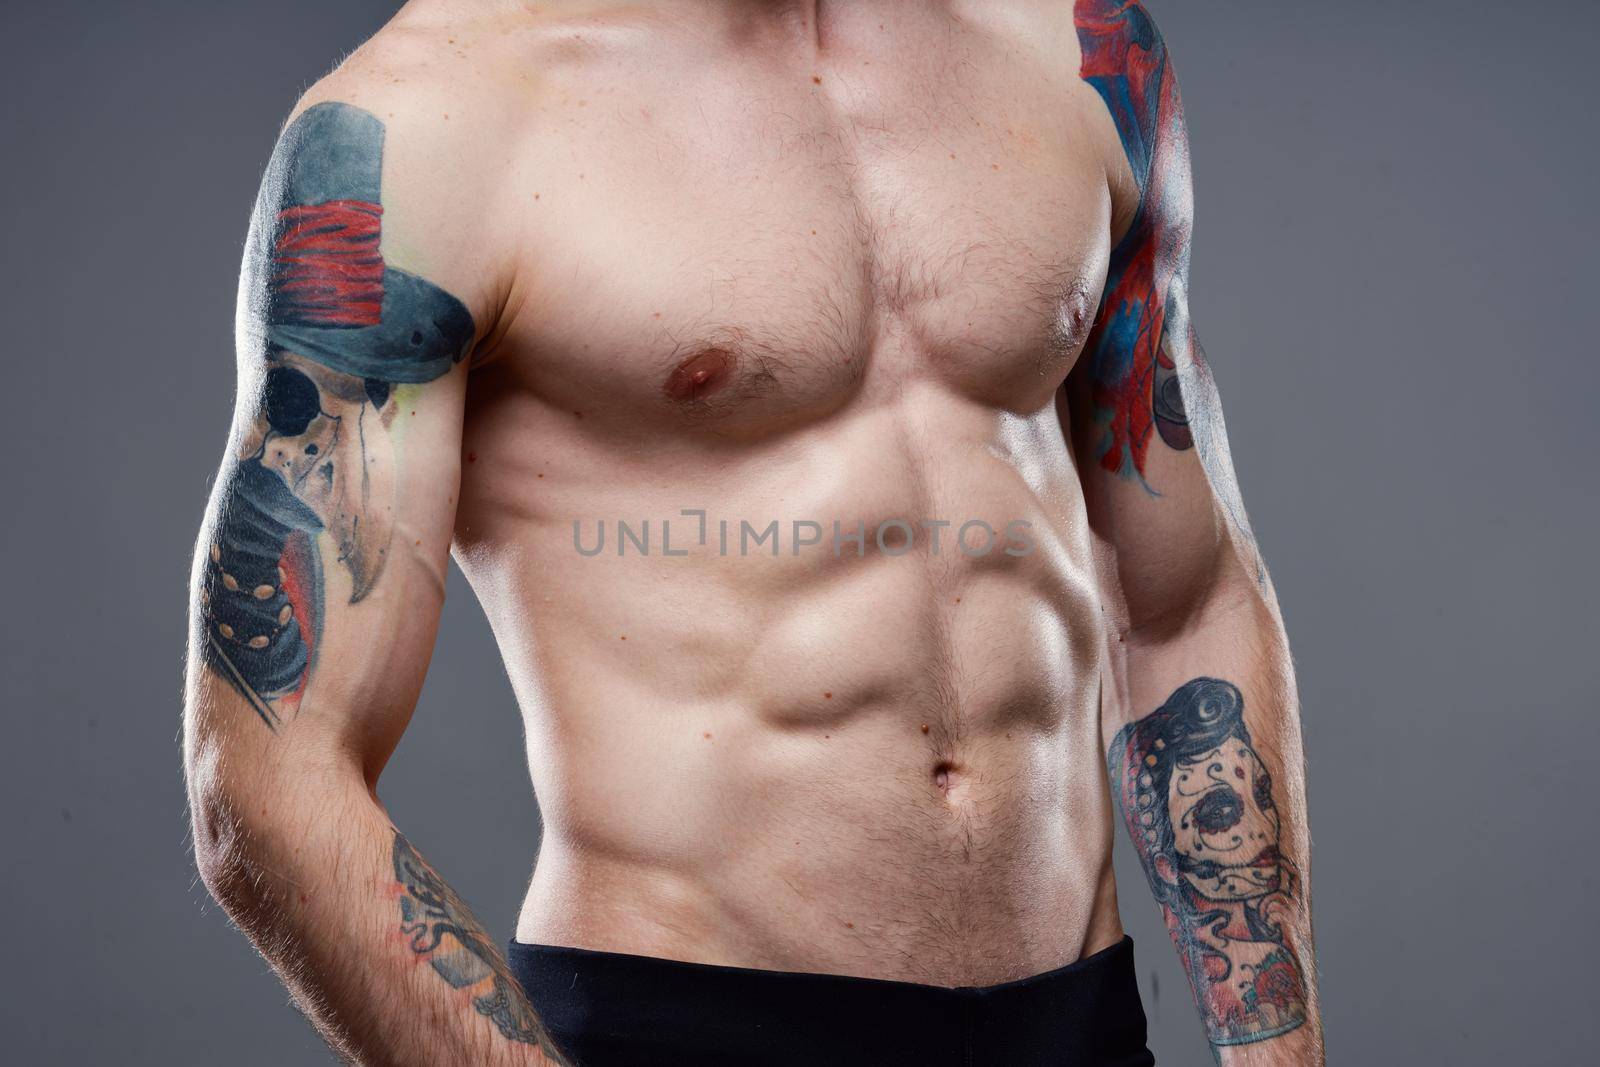 pumped up abs gym workout close-up. High quality photo